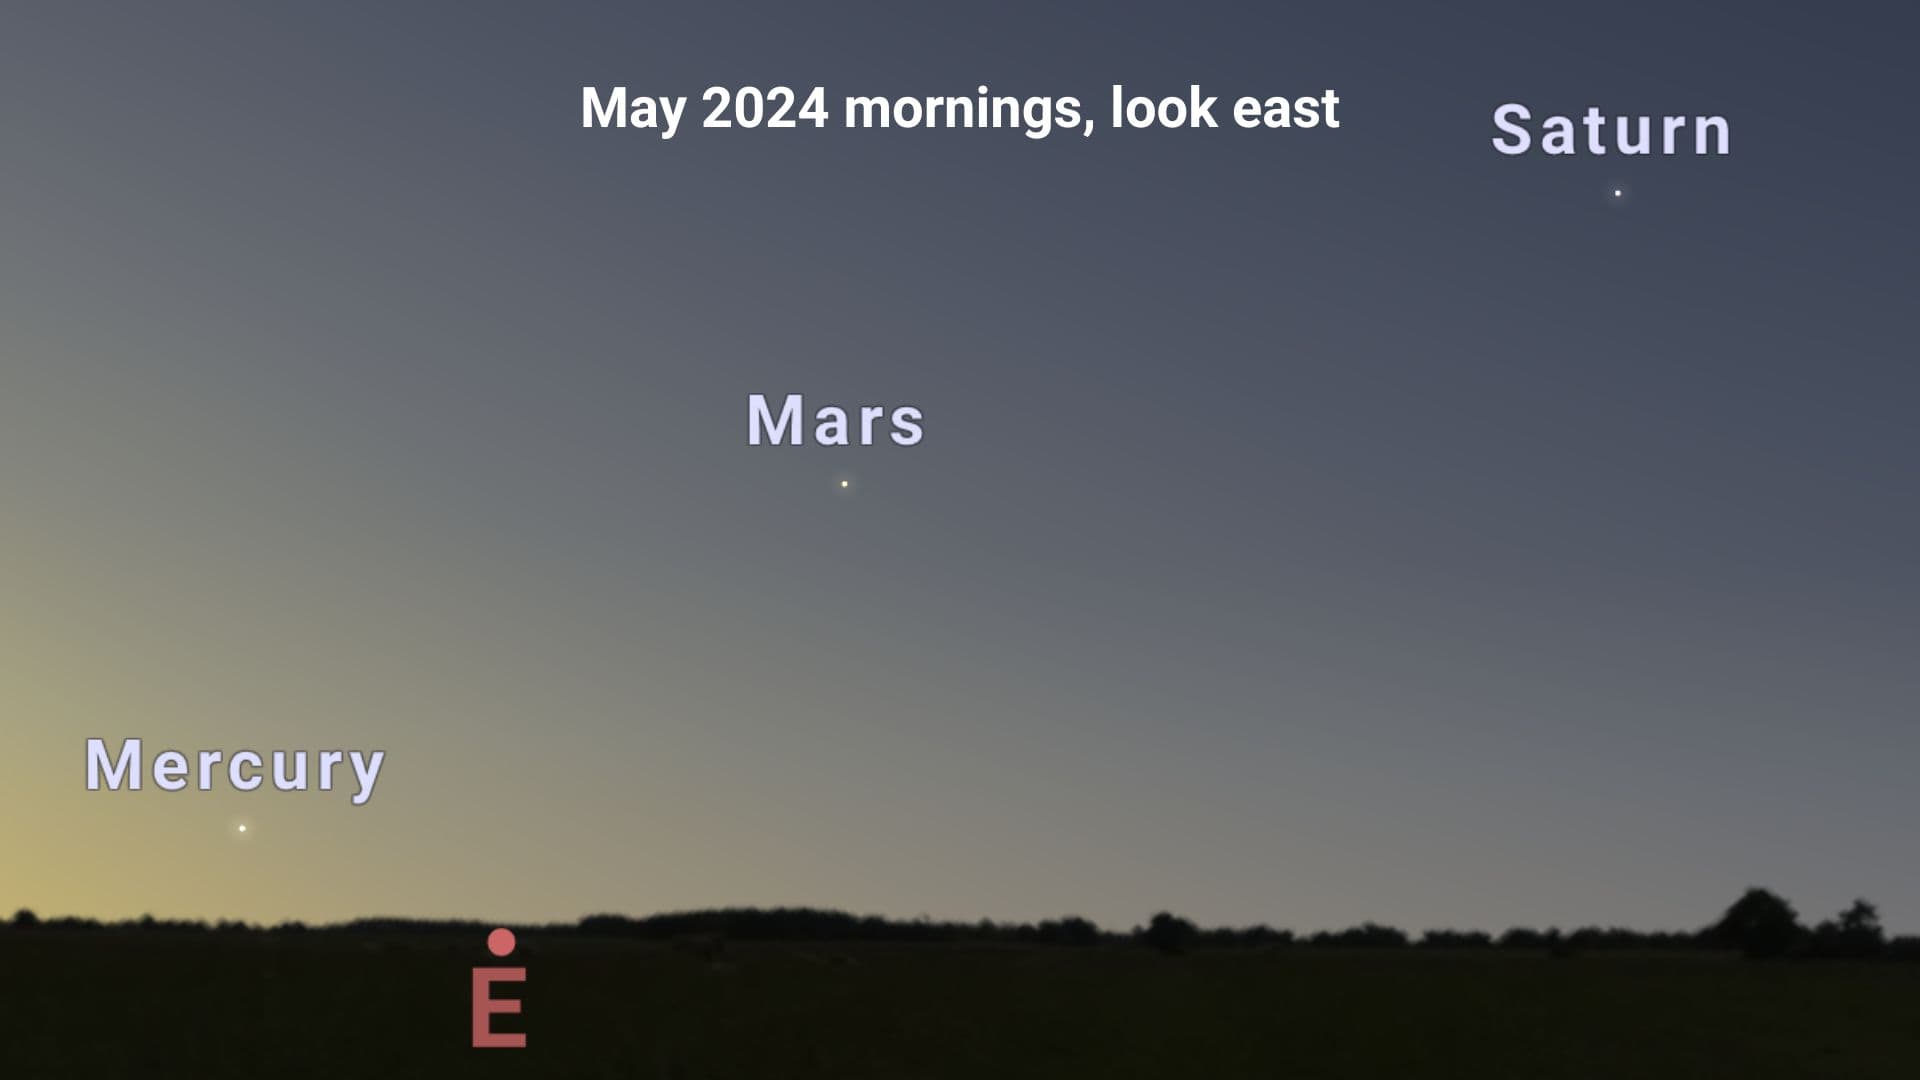 Position of the three planets, Mercury, Mars, and Saturn, in the eastern sky preceding sunrise in May 2024